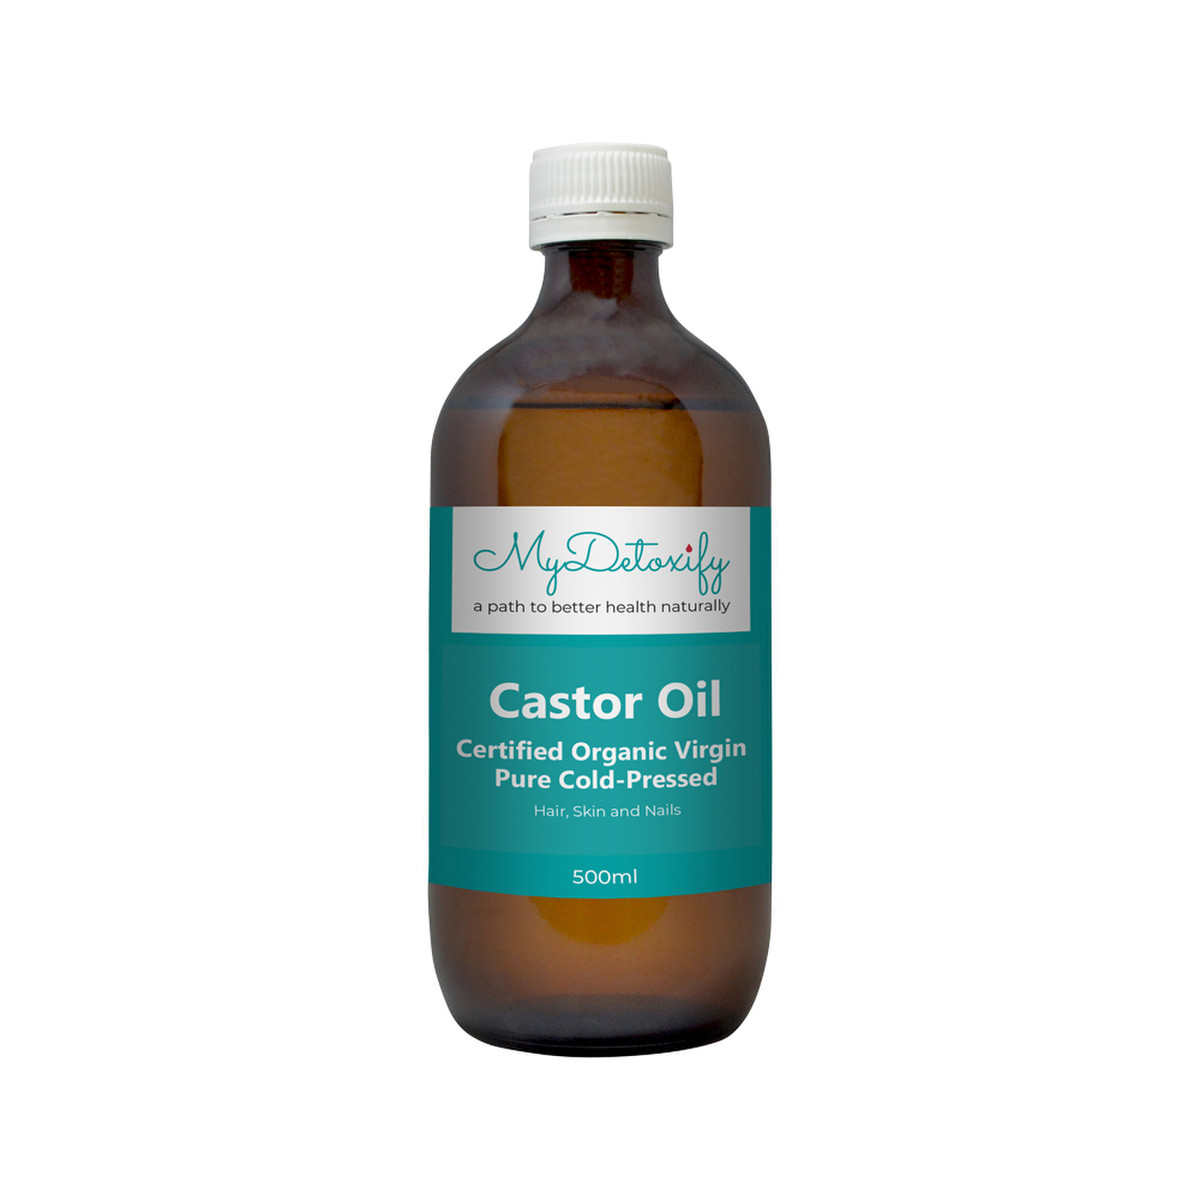 MYDETOXIFY - Certified Organic Virgin Pure Cold-Pressed Castor Oil 500ml